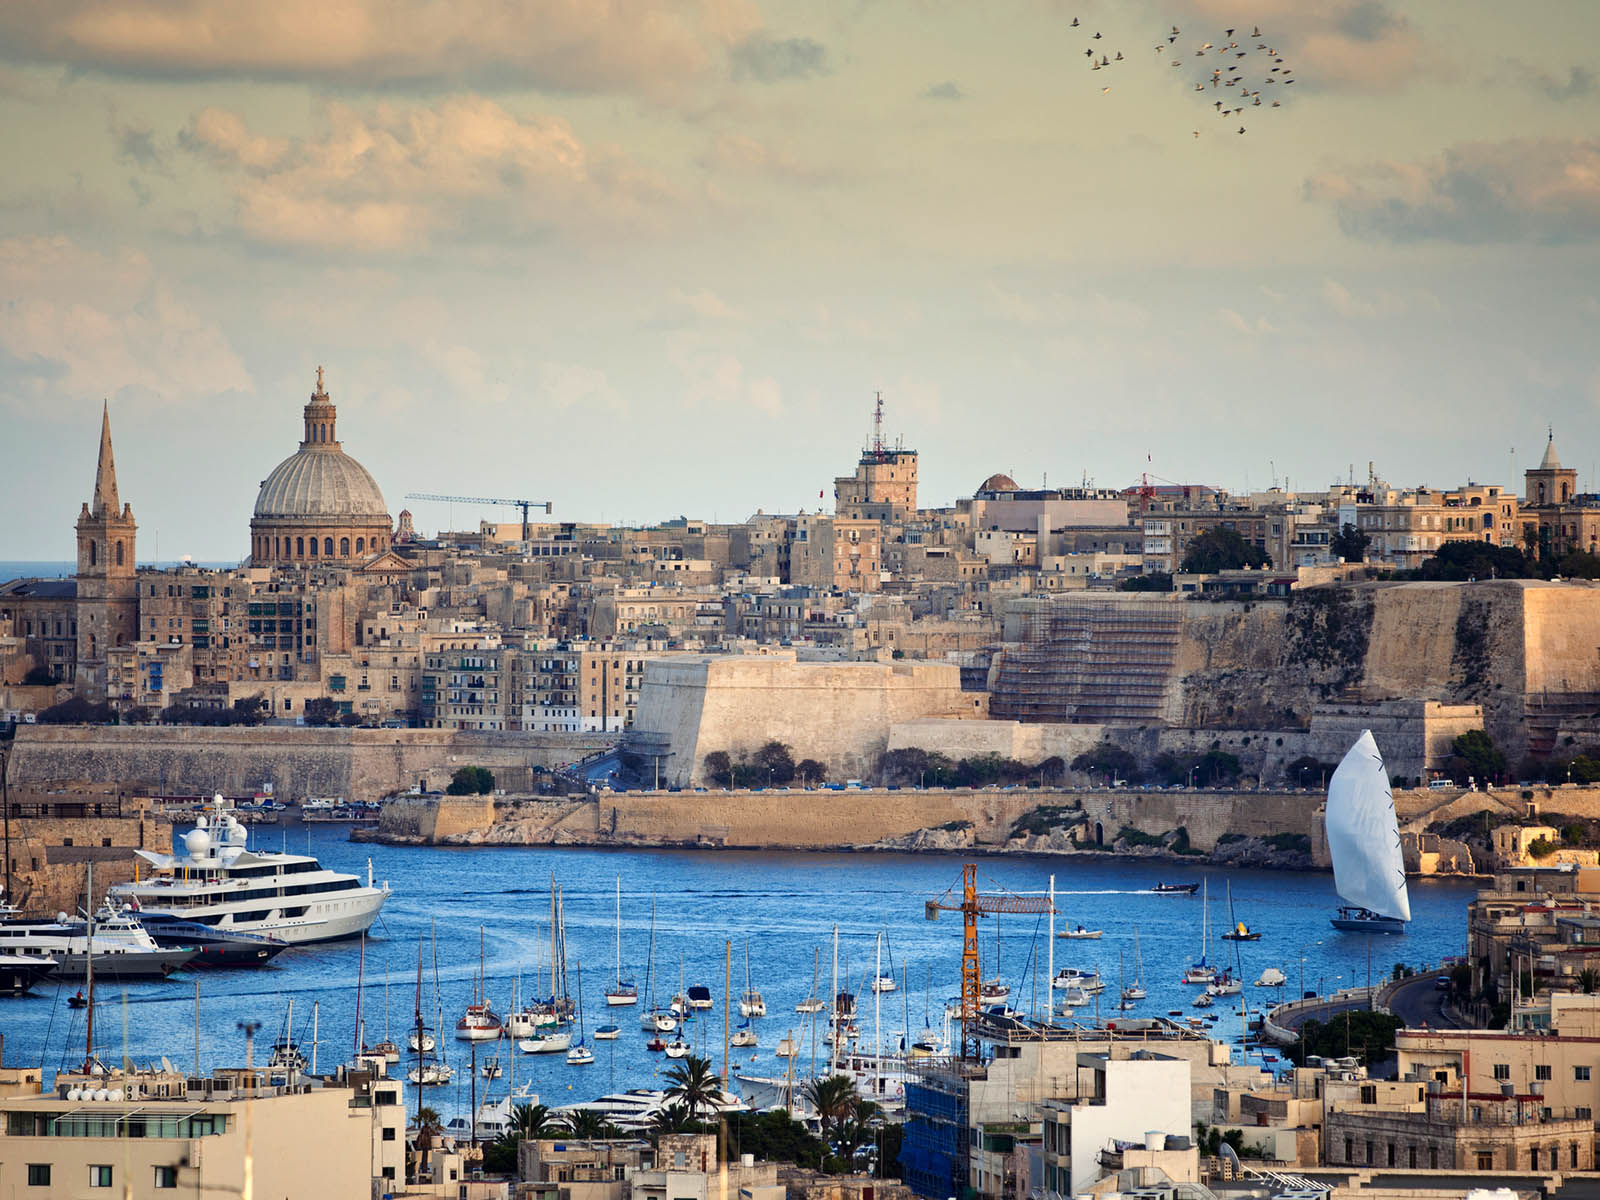 A river with many boats docked. A view of Malta architecture in the background